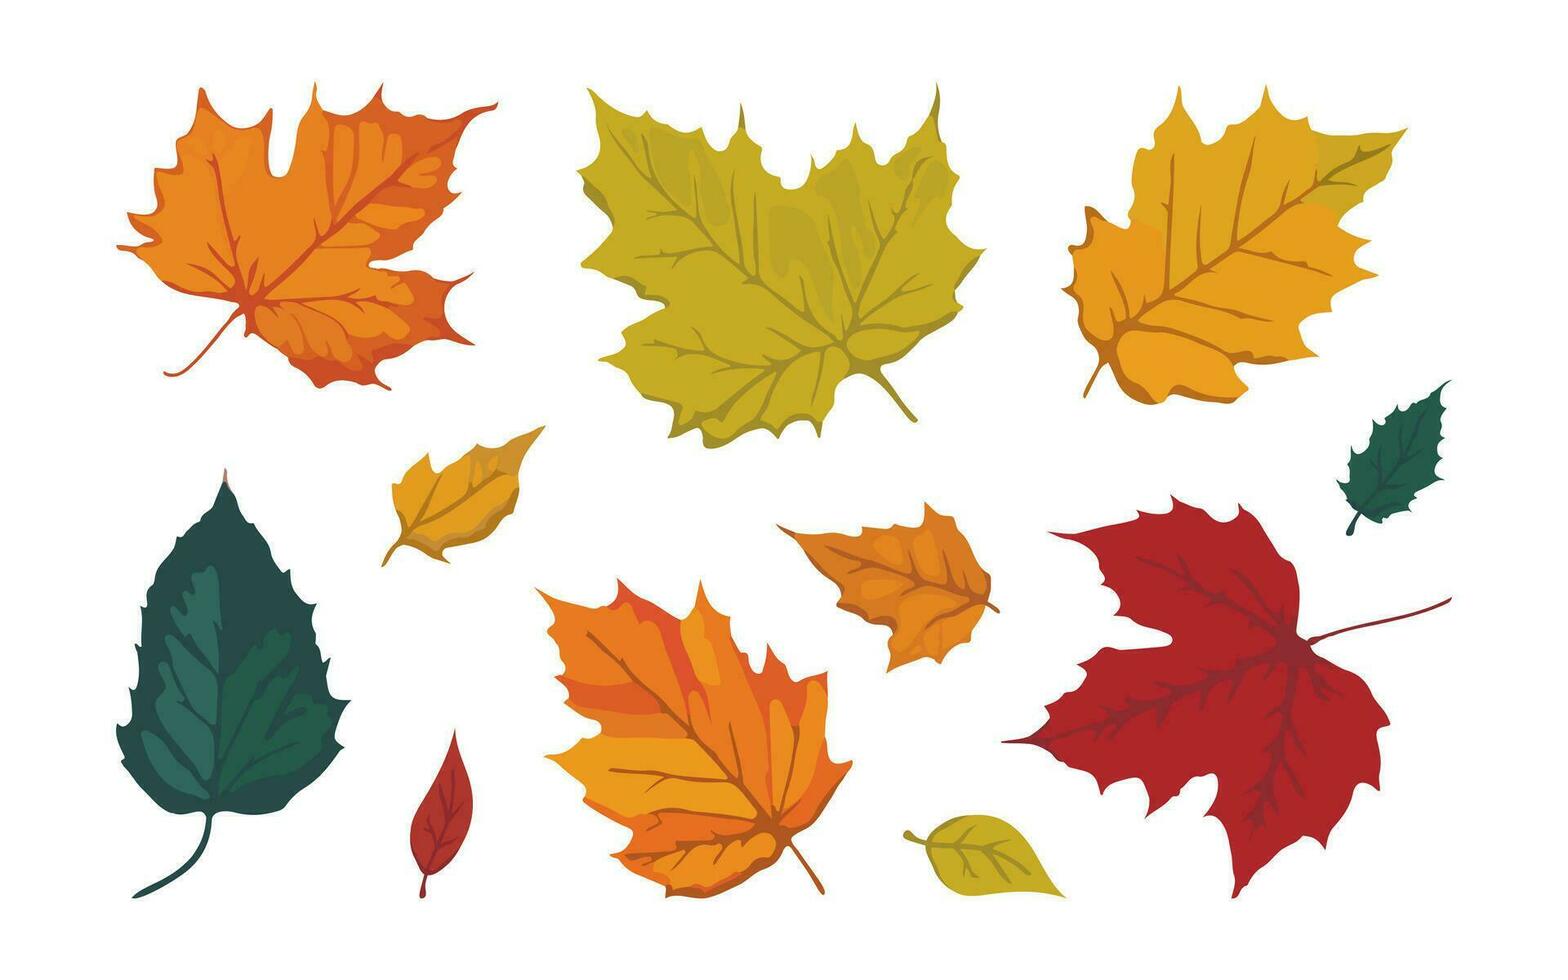 A vibrant colorful set of fallen maple leaves, flat design cartoon style, collection of objects on white background. Vector illustration